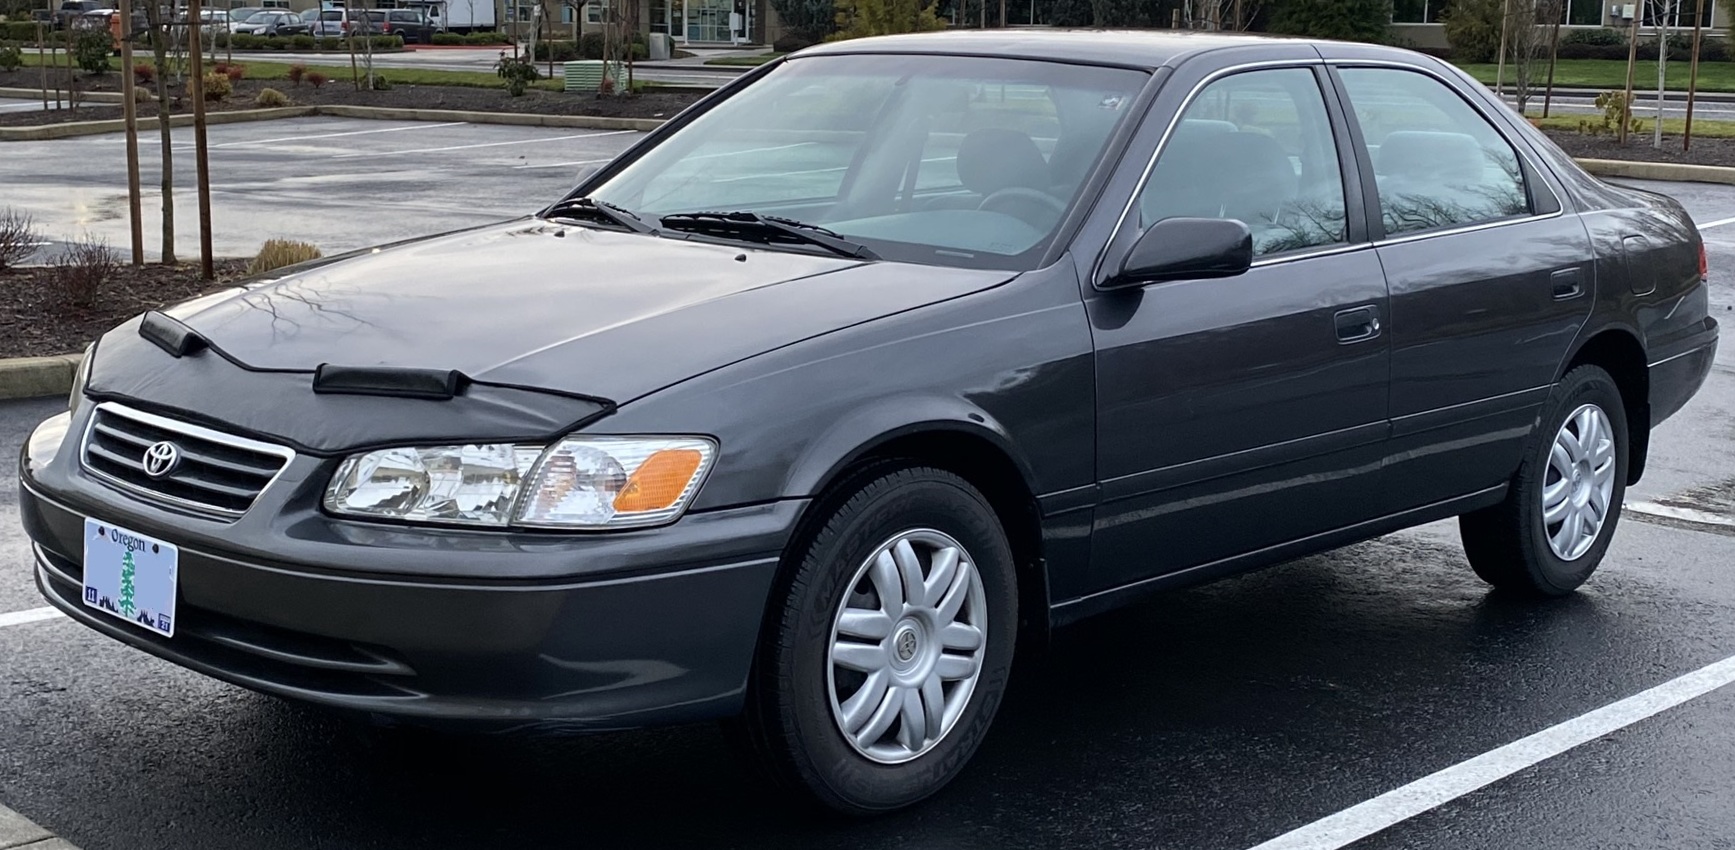 File:2001 Toyota Camry LE.jpg - Wikimedia Commons